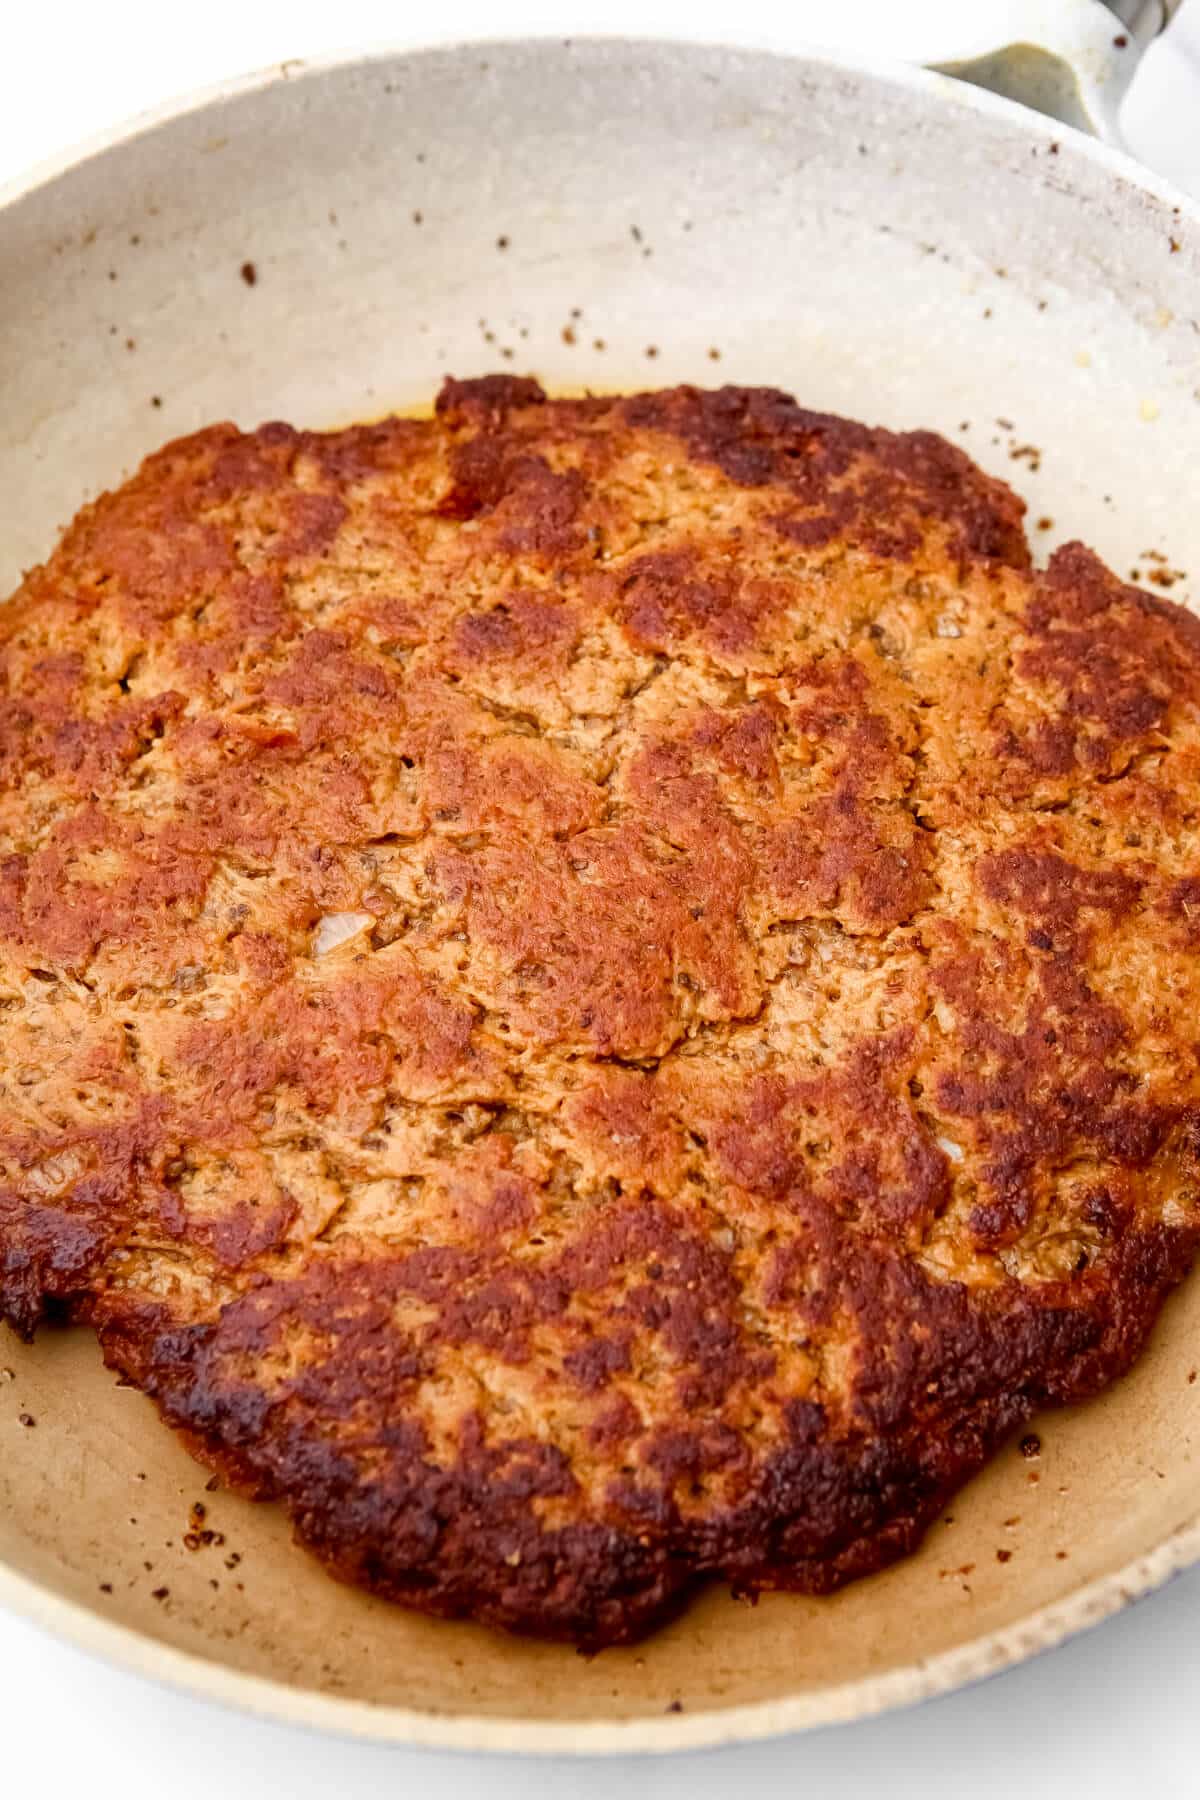 A large round of seitan frying in a skillet.